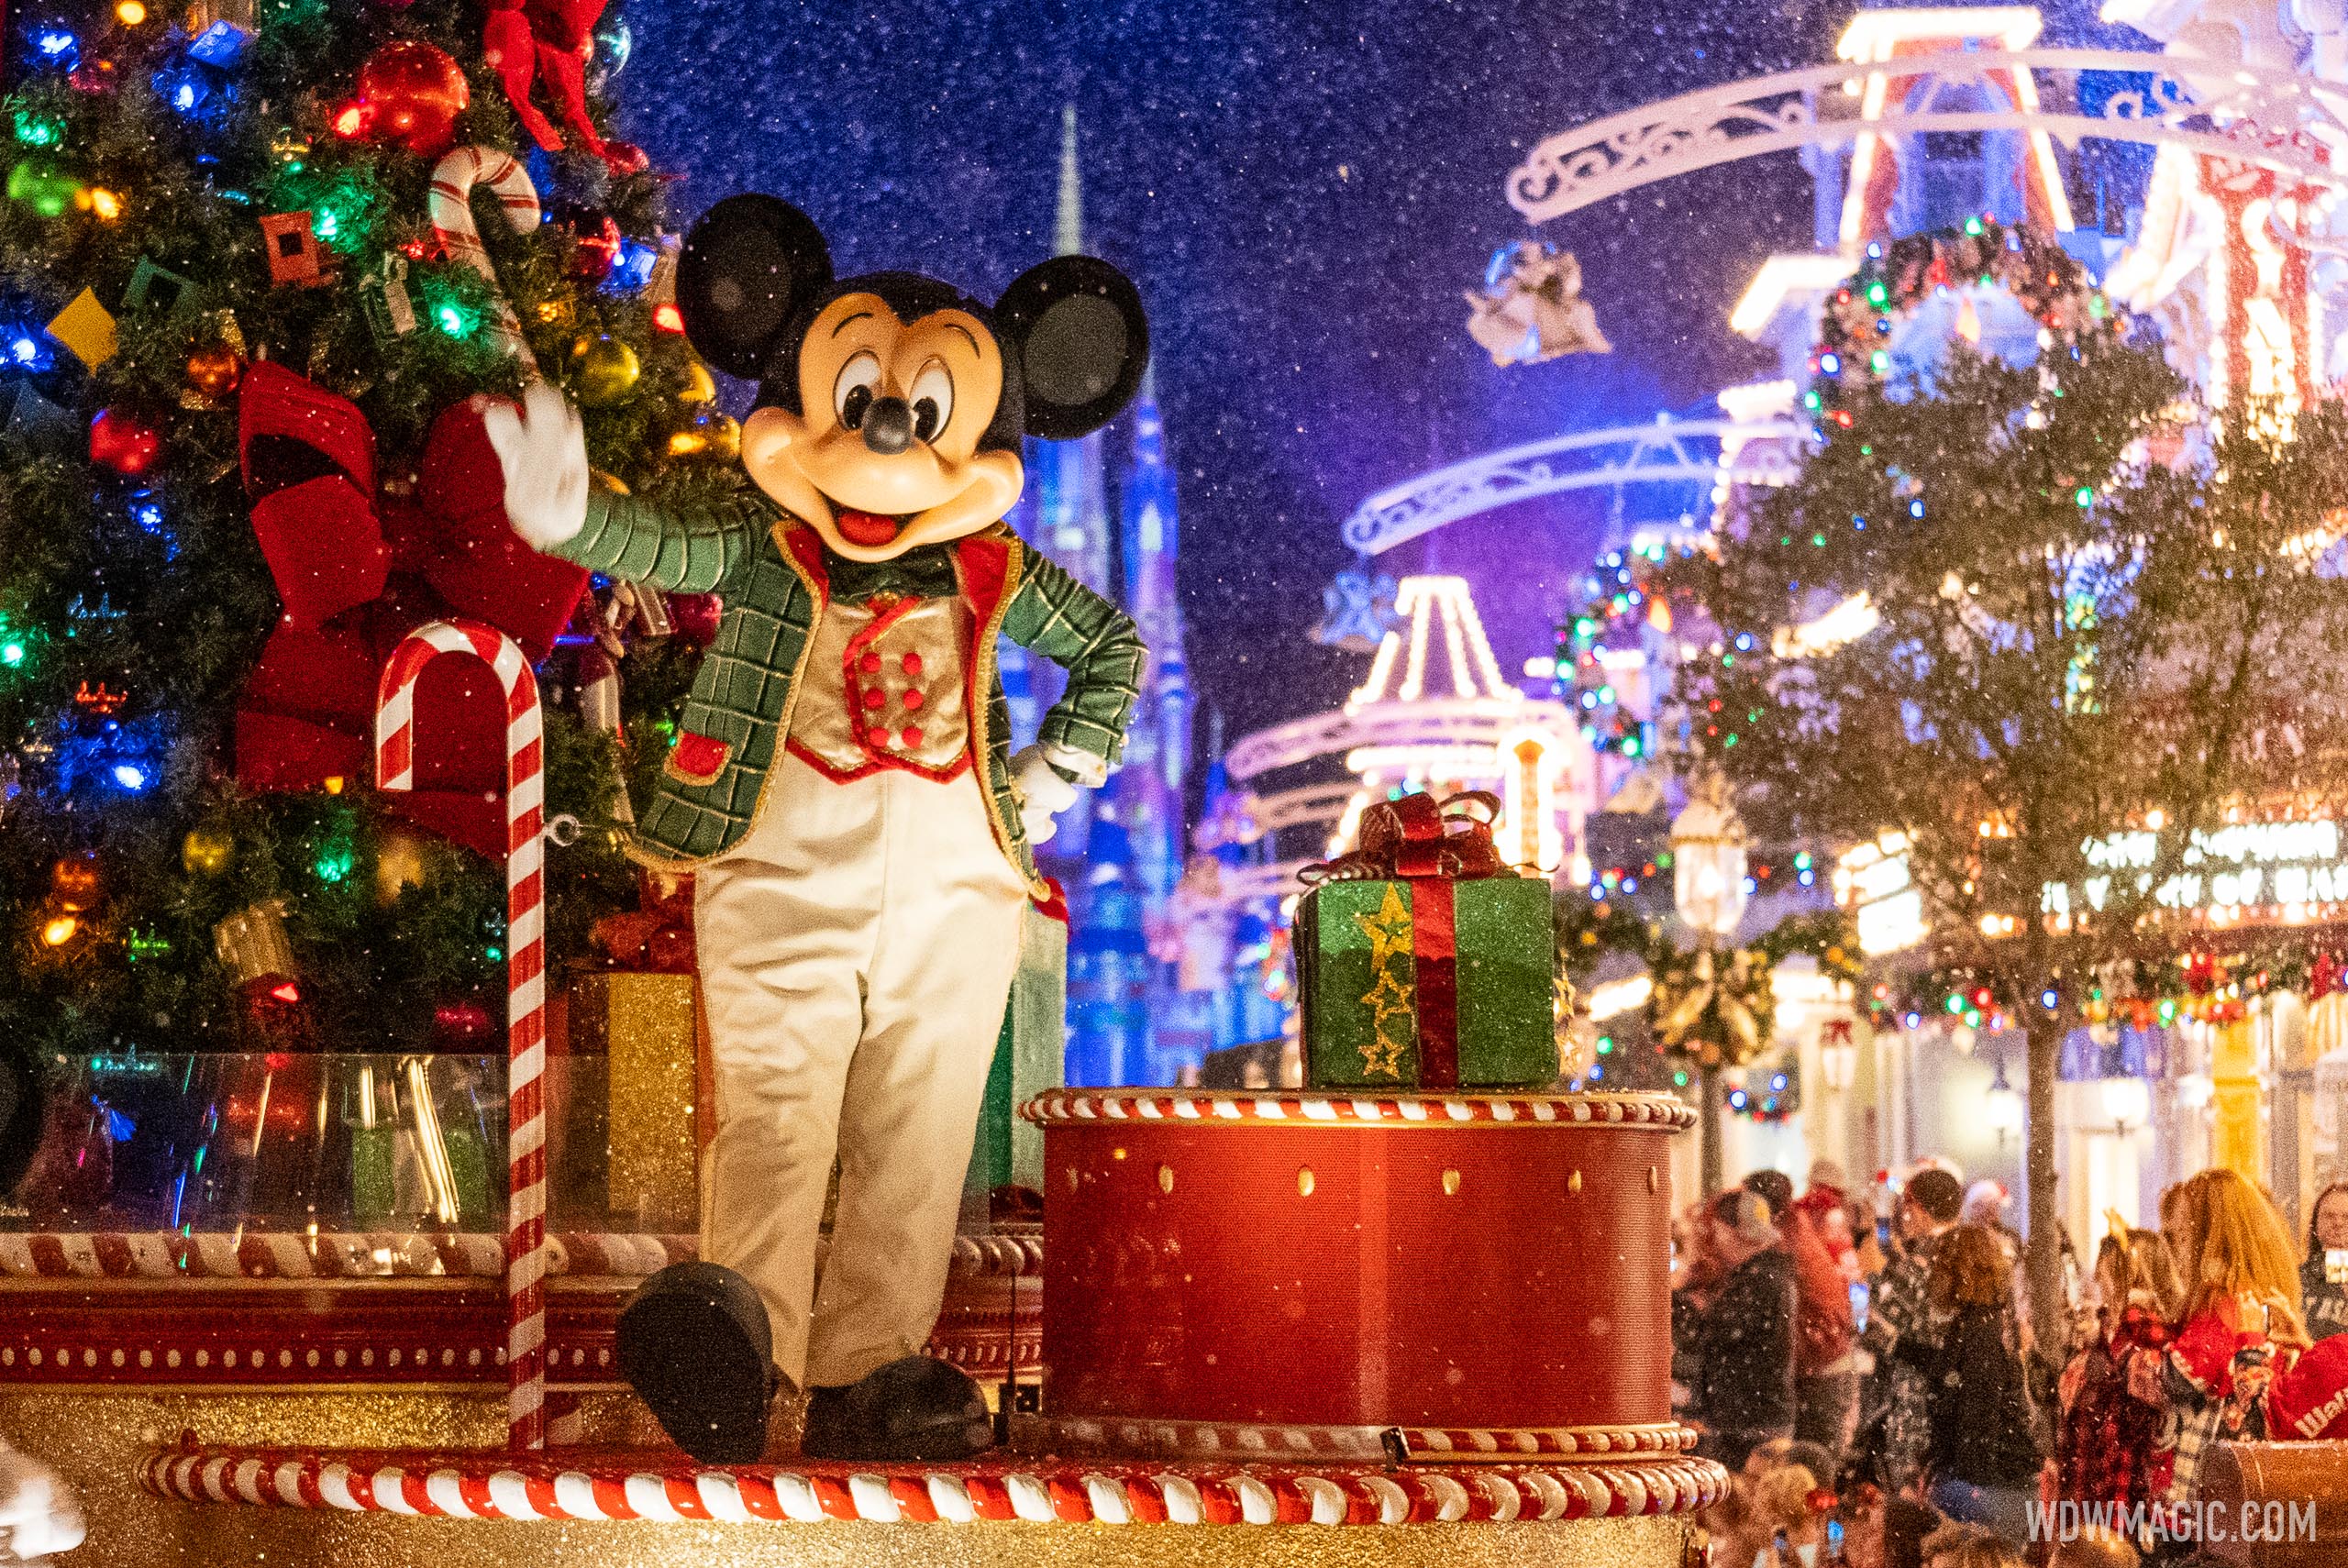 Magic Kingdom's 'Mickey's Once Upon a Christmastime Parade' joins